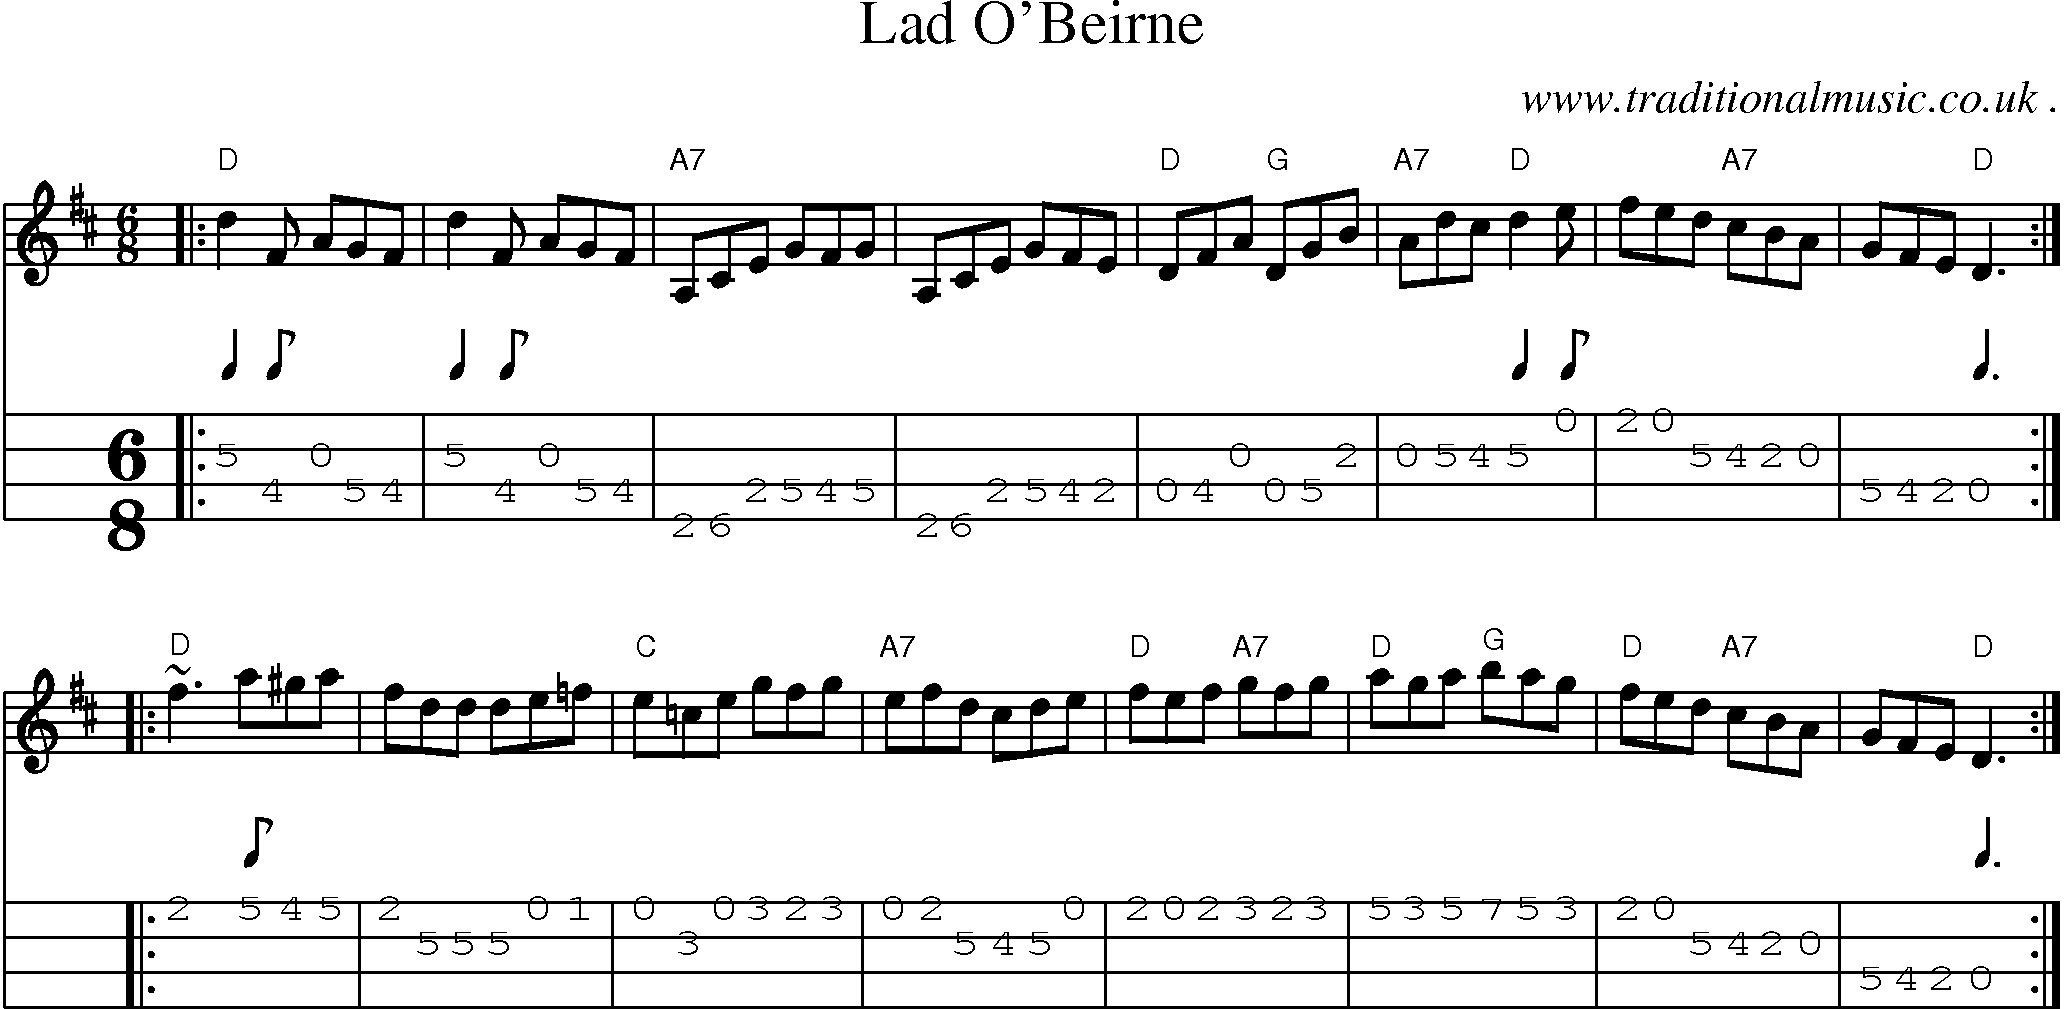 Sheet-music  score, Chords and Mandolin Tabs for Lad Obeirne